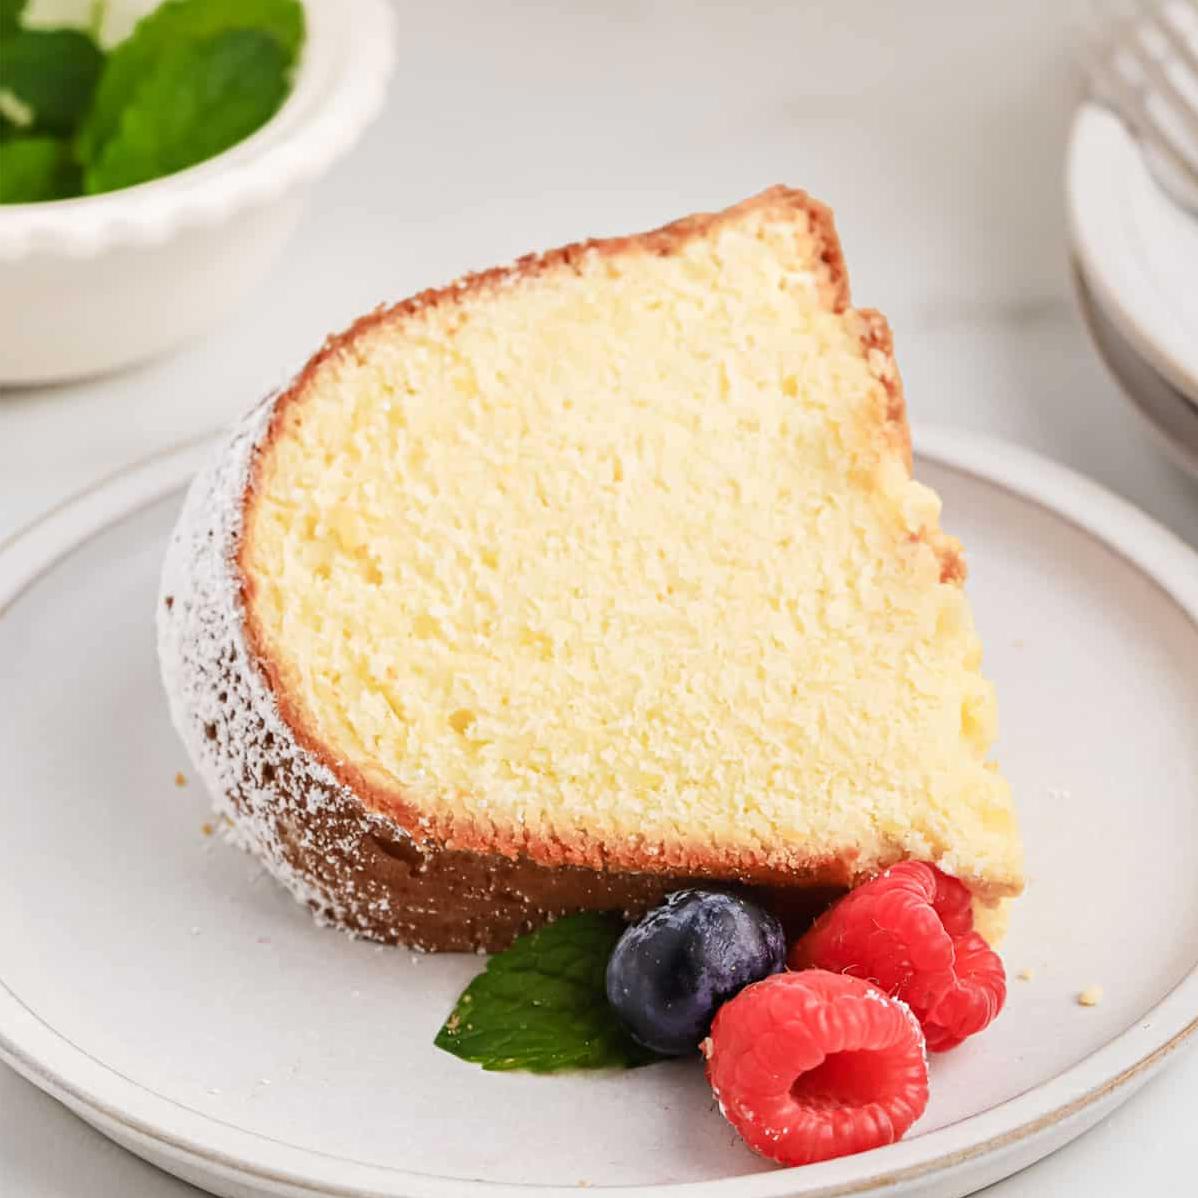  It's time to indulge in this delectable Cream Cheese Pound Cake.